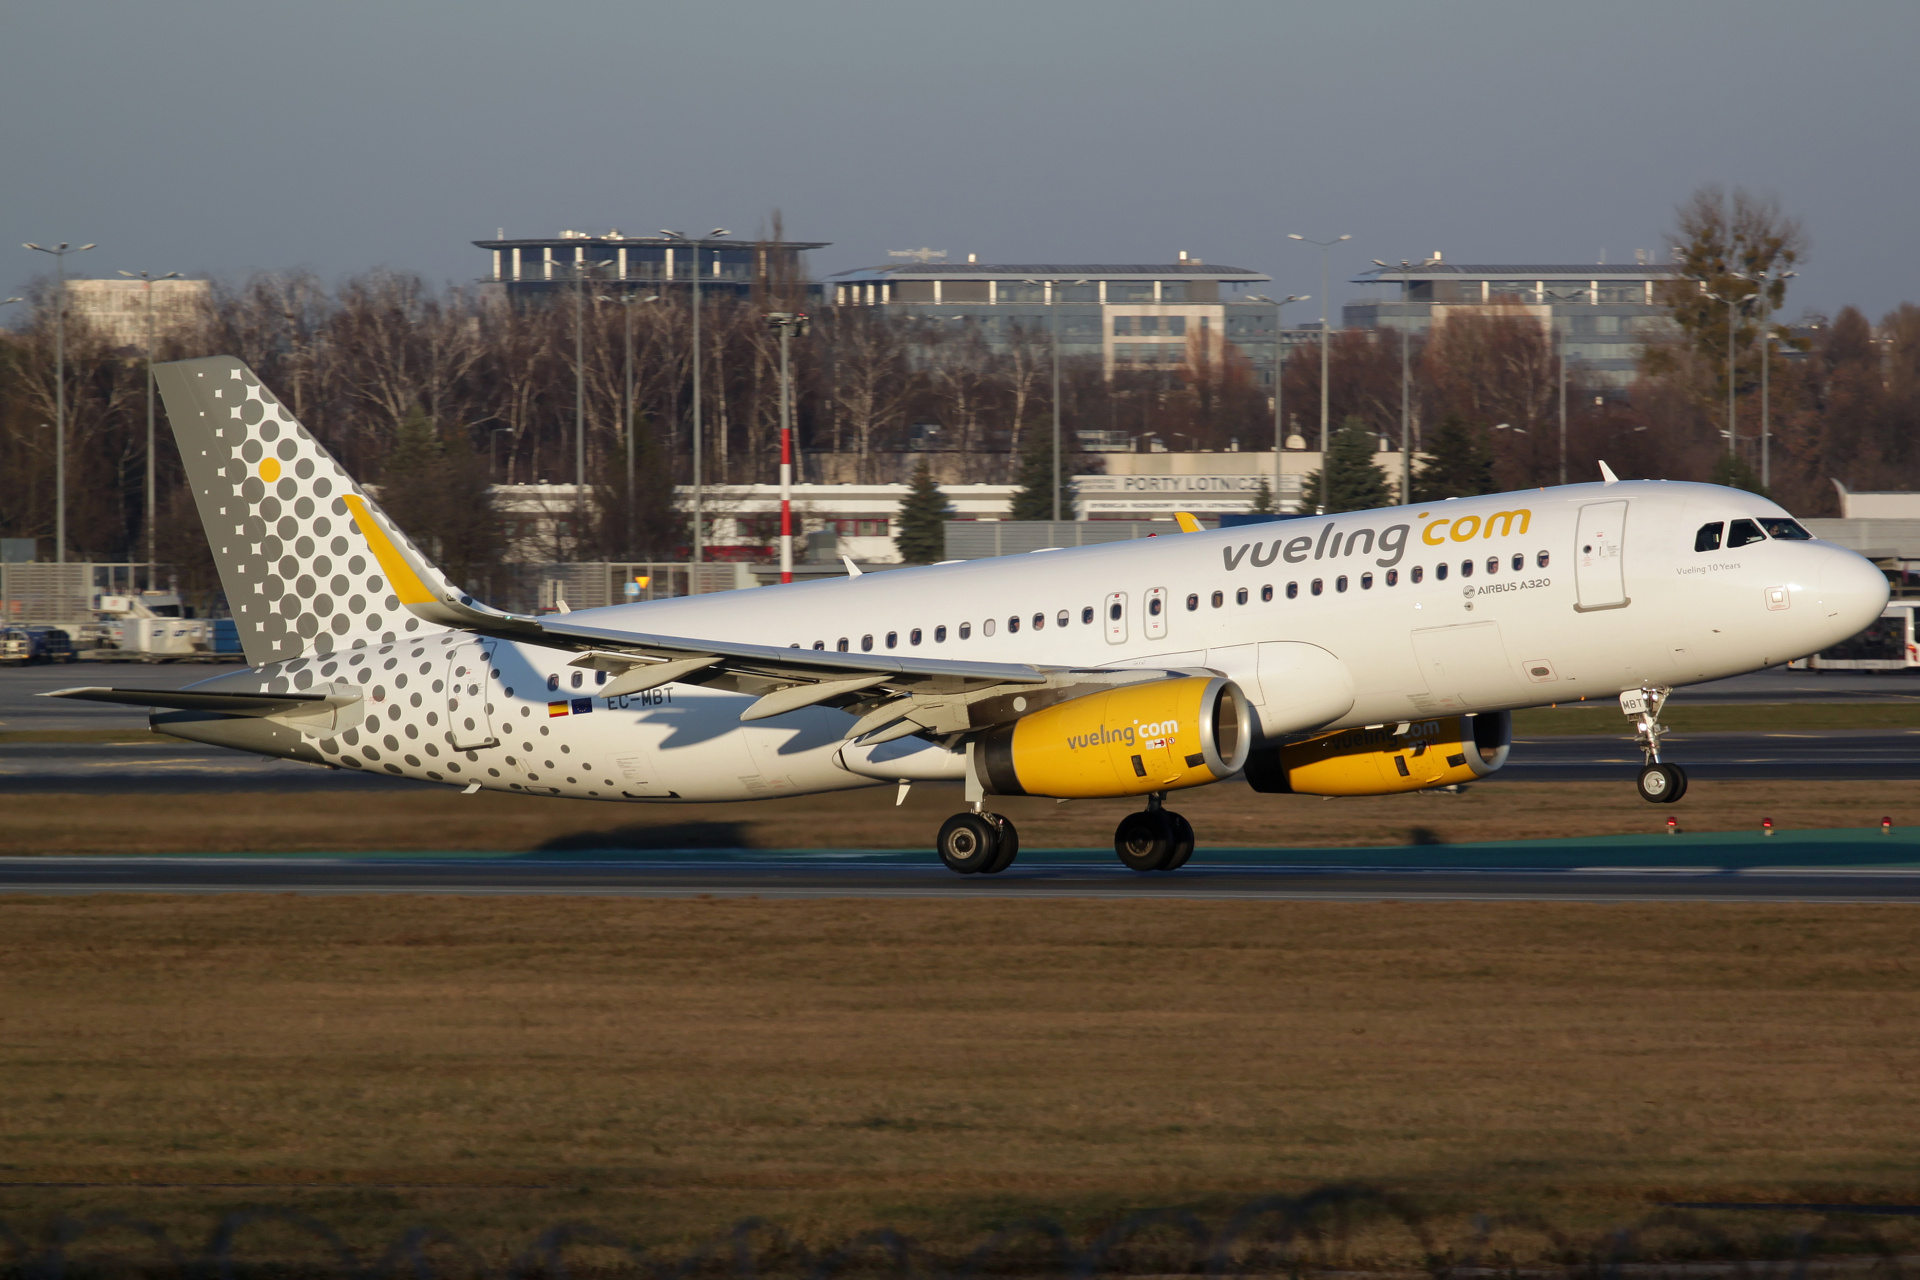 EC-MBT (Aircraft » EPWA Spotting » Airbus A320-200 » Vueling Airlines)